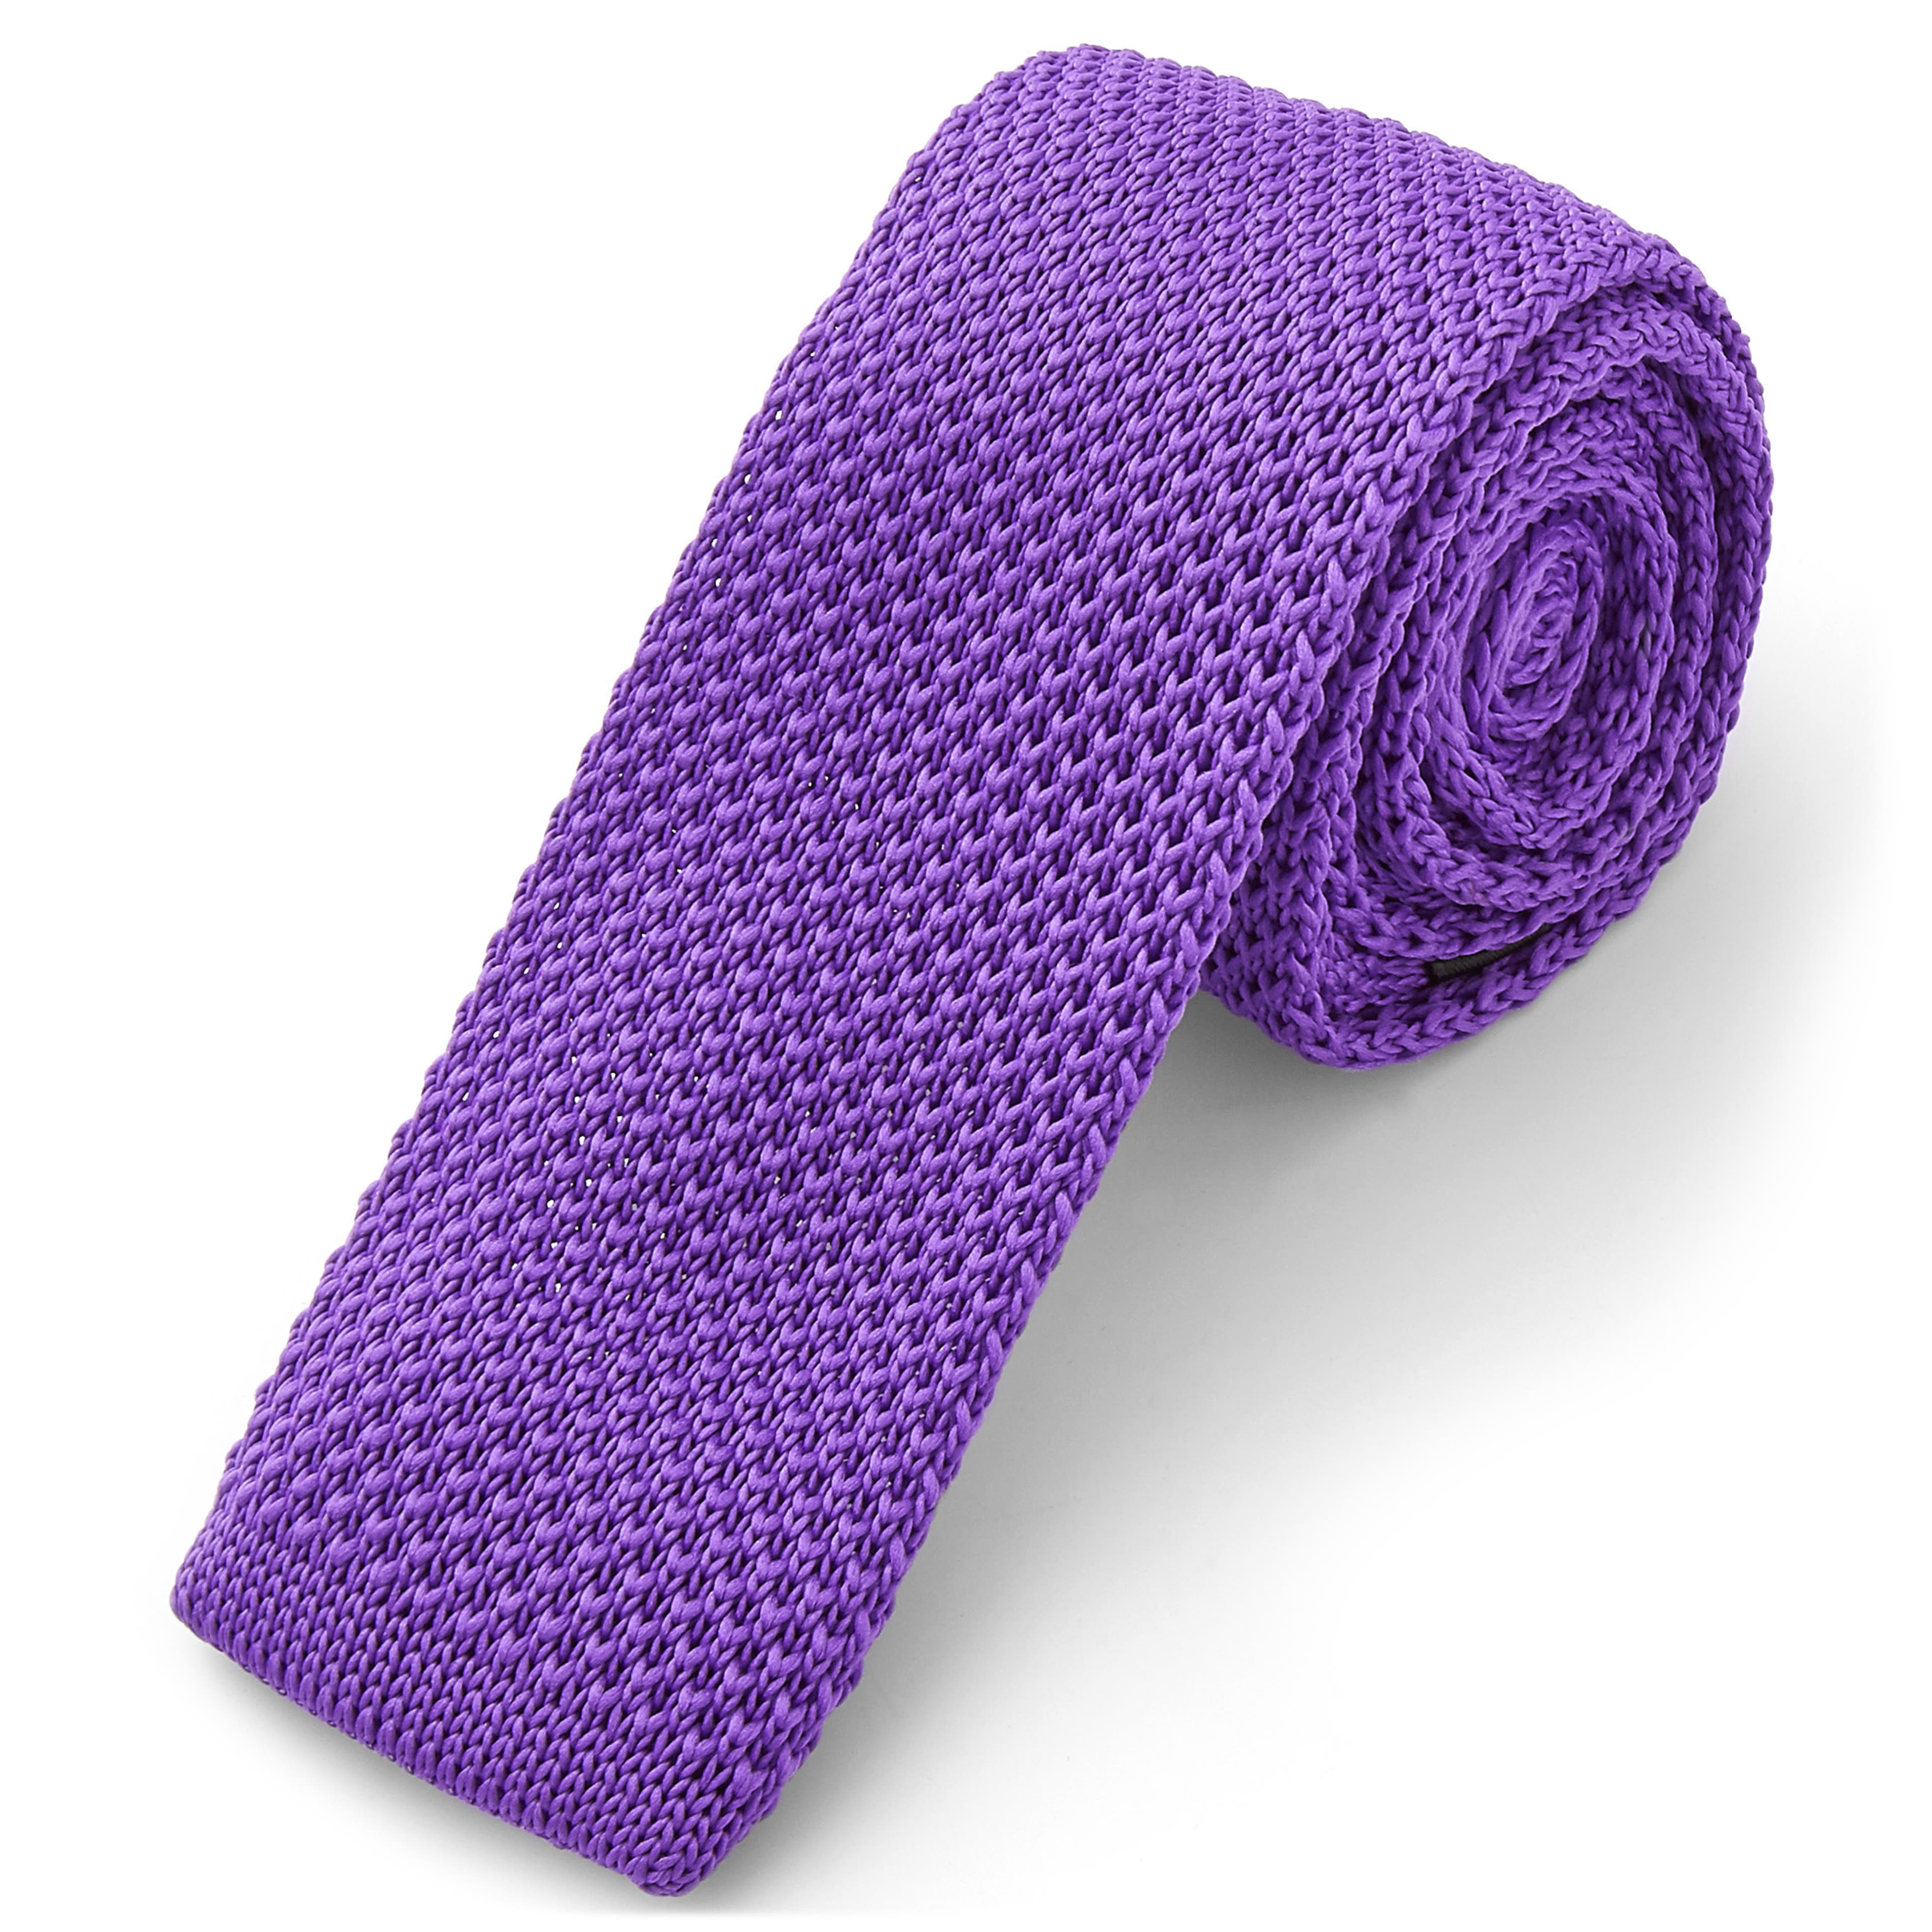 Lavender Polyester Knitted Tie